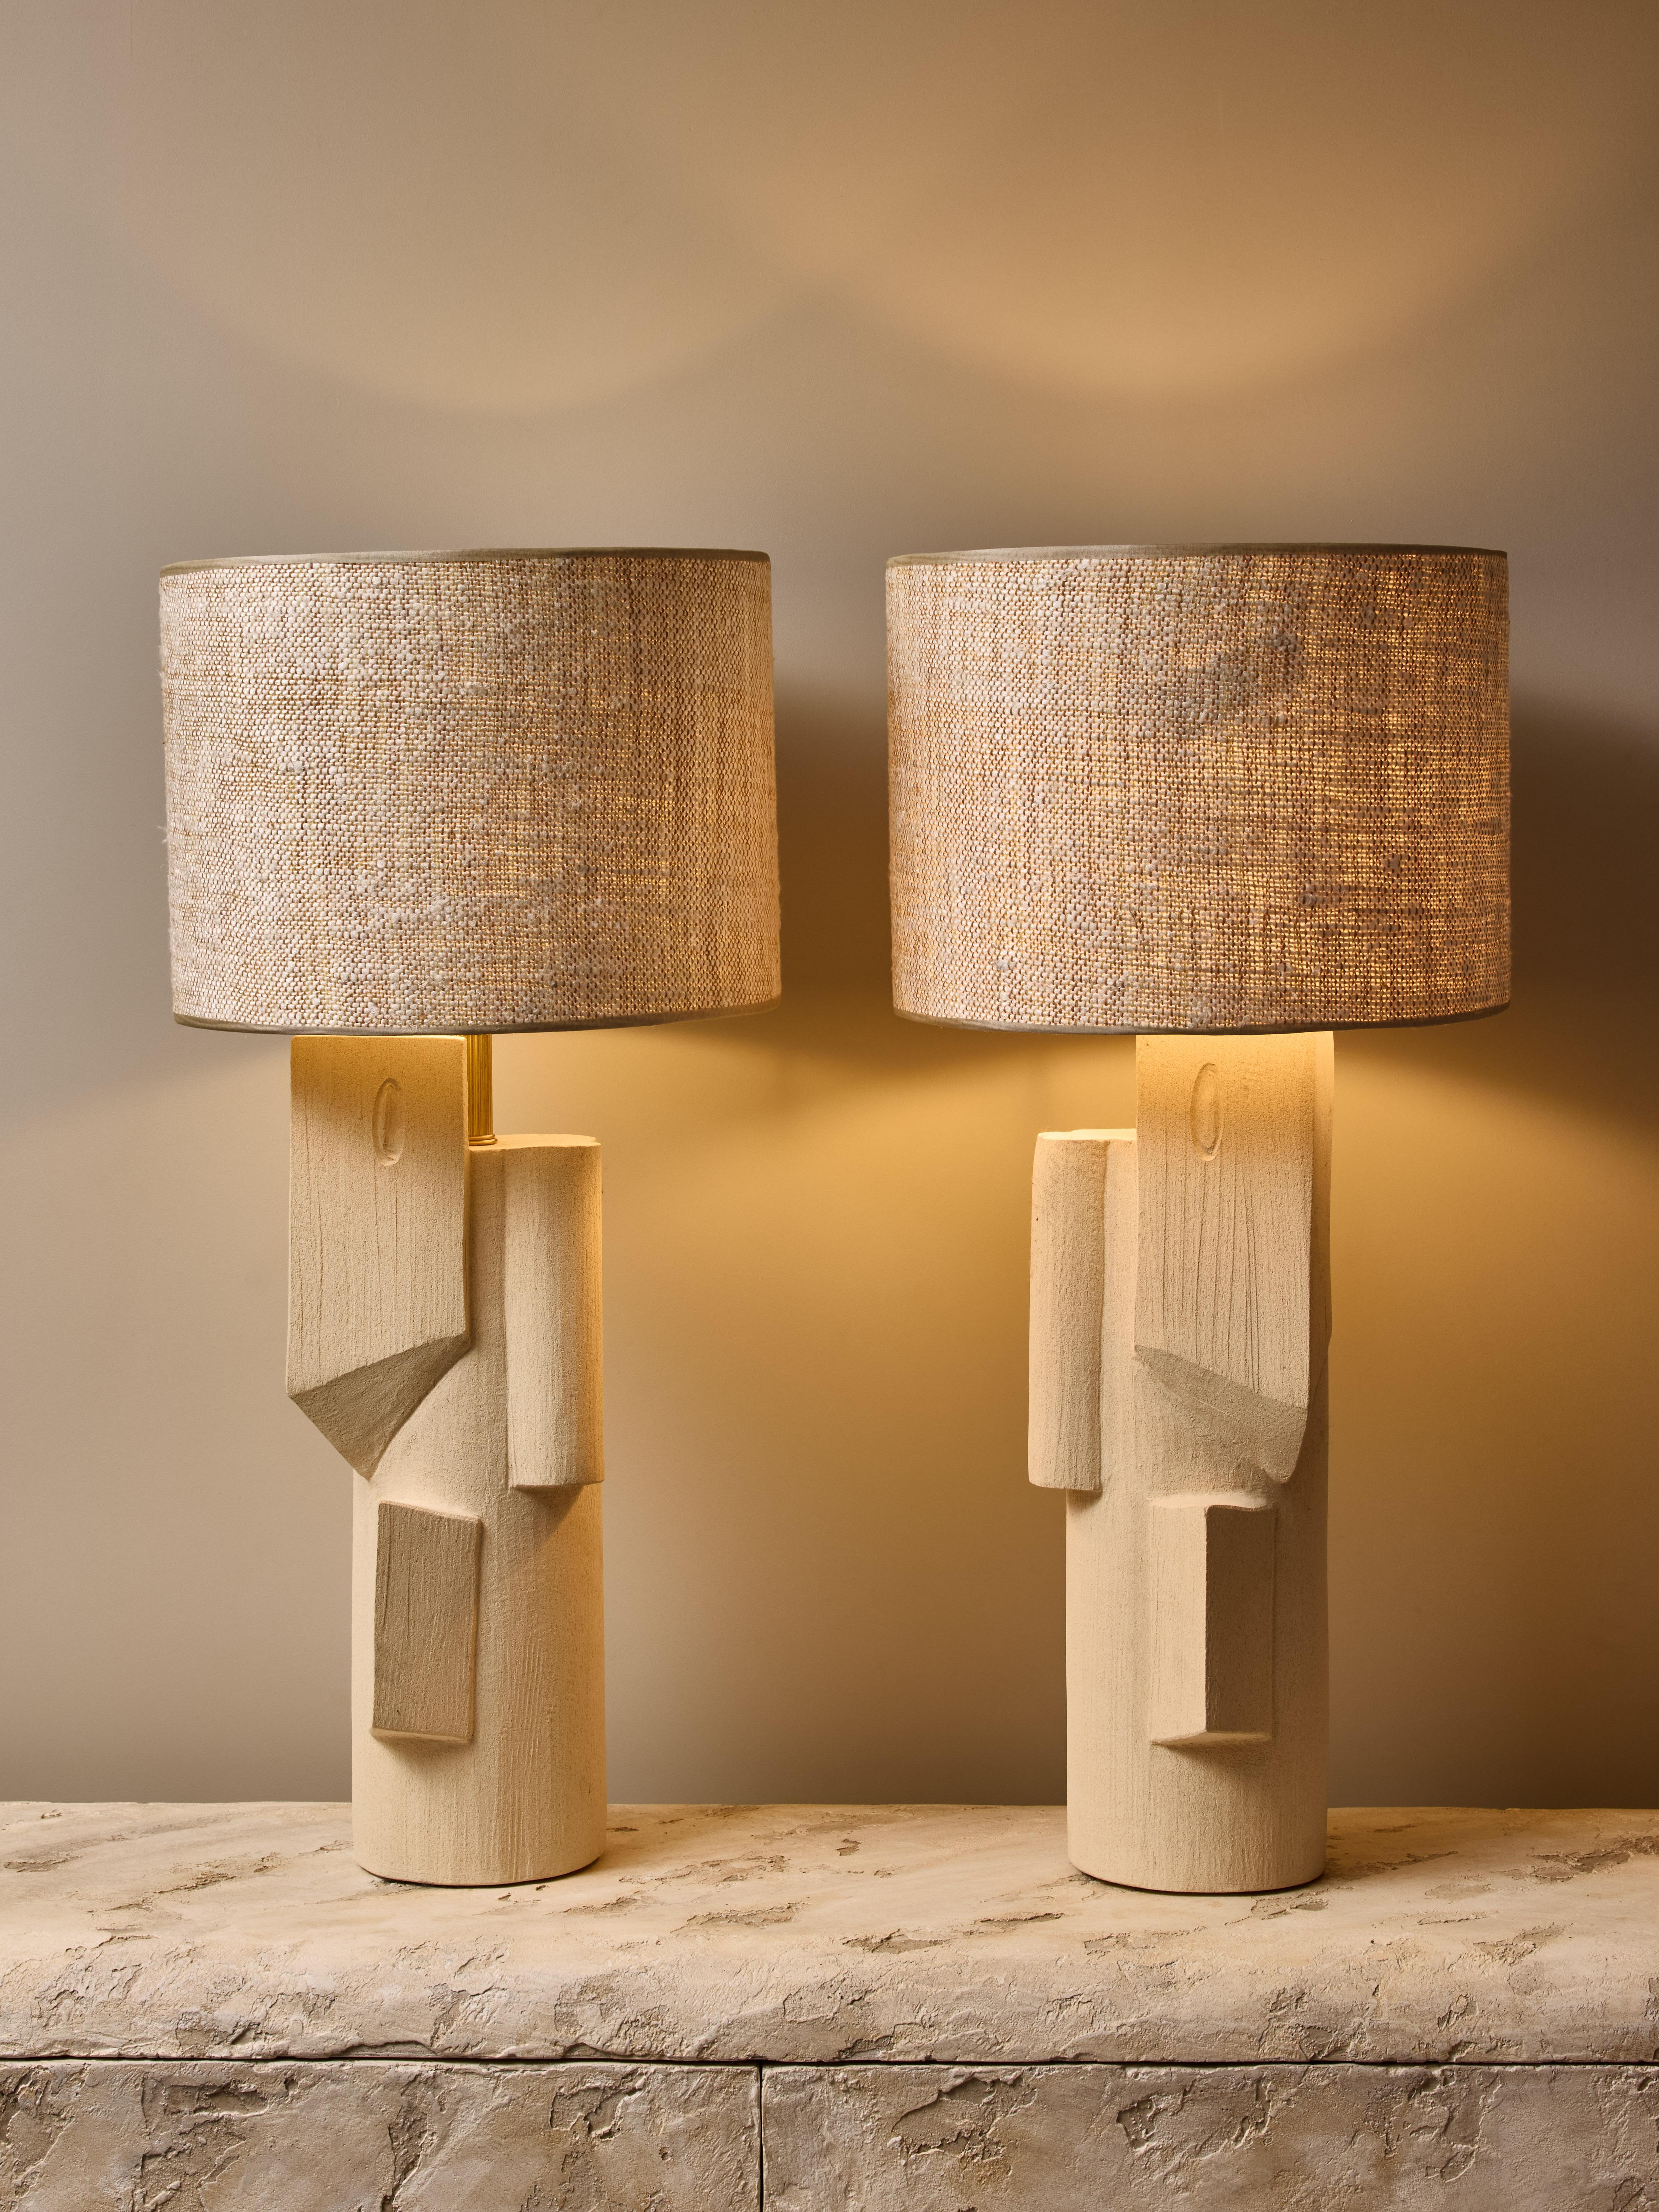 Pair of ceramic table lamps by the talented french contemporary artist Olivia Cognet.

These large tubular shape lamps have mirrored design of sharp geometrical shapes, brass hardware and topped with a custom lampshade.

Stamped on the